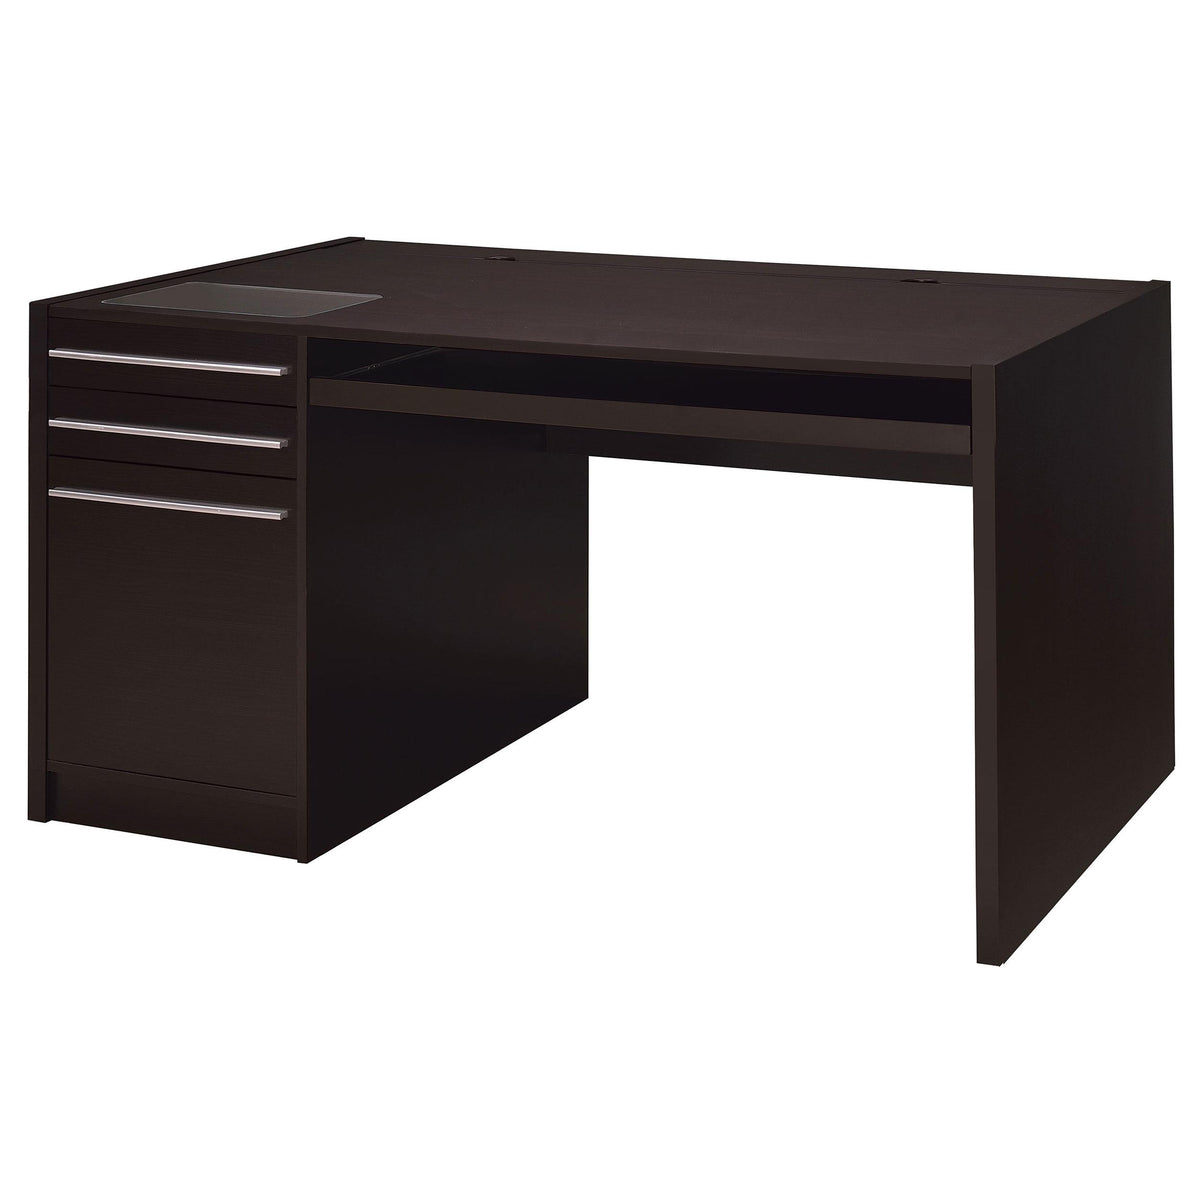 Halston 3-drawer Connect-it Office Desk Cappuccino  Las Vegas Furniture Stores